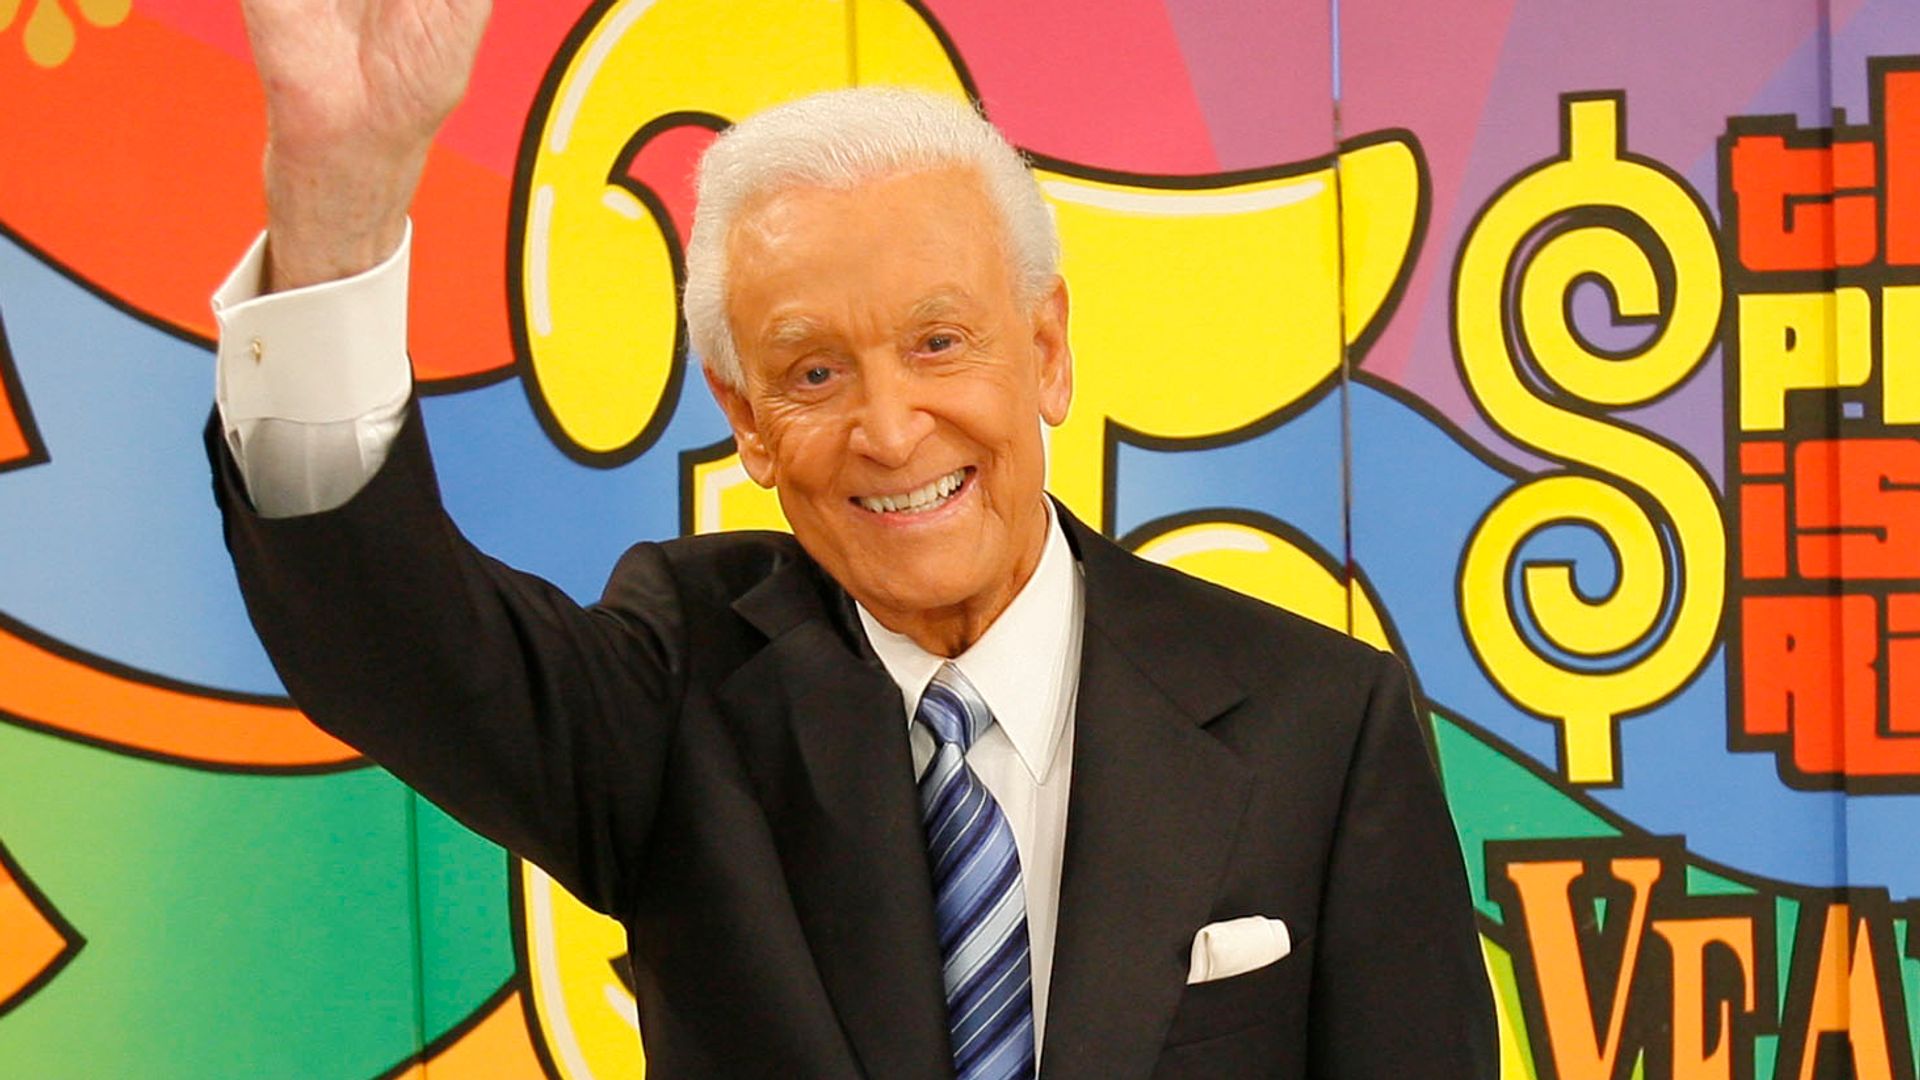 Television host Bob Barker poses for photographers at his last taping of "The Price is Right"